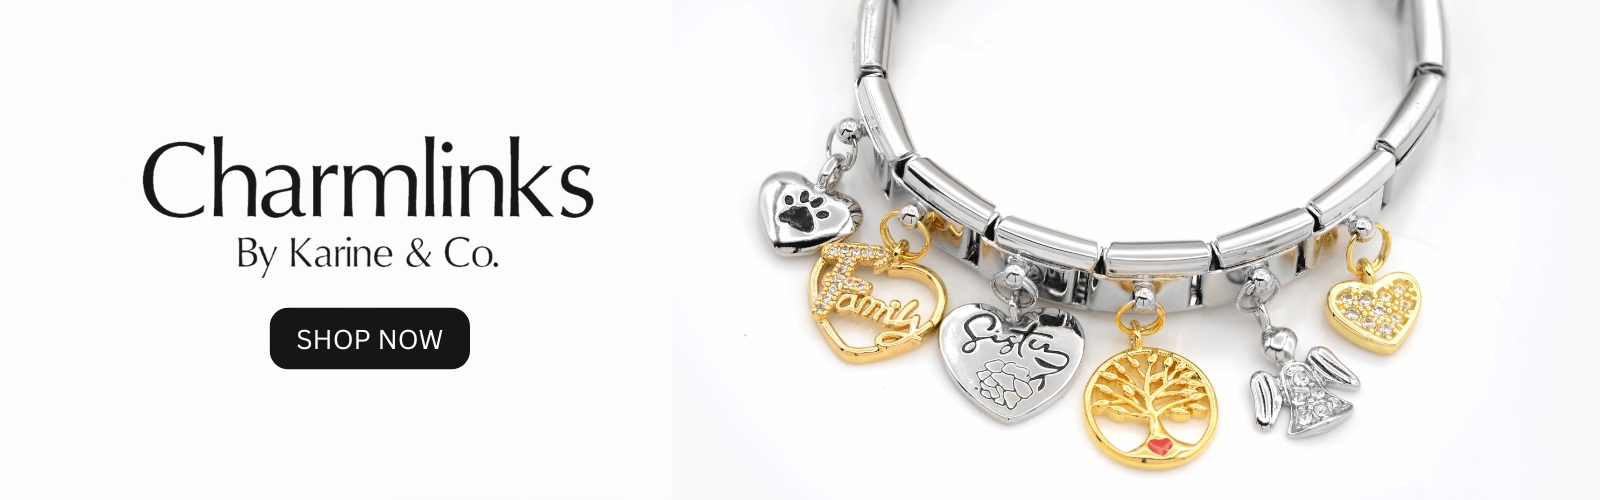 Personalized Charmlinks Bracelets - Create Your Own Style Statement